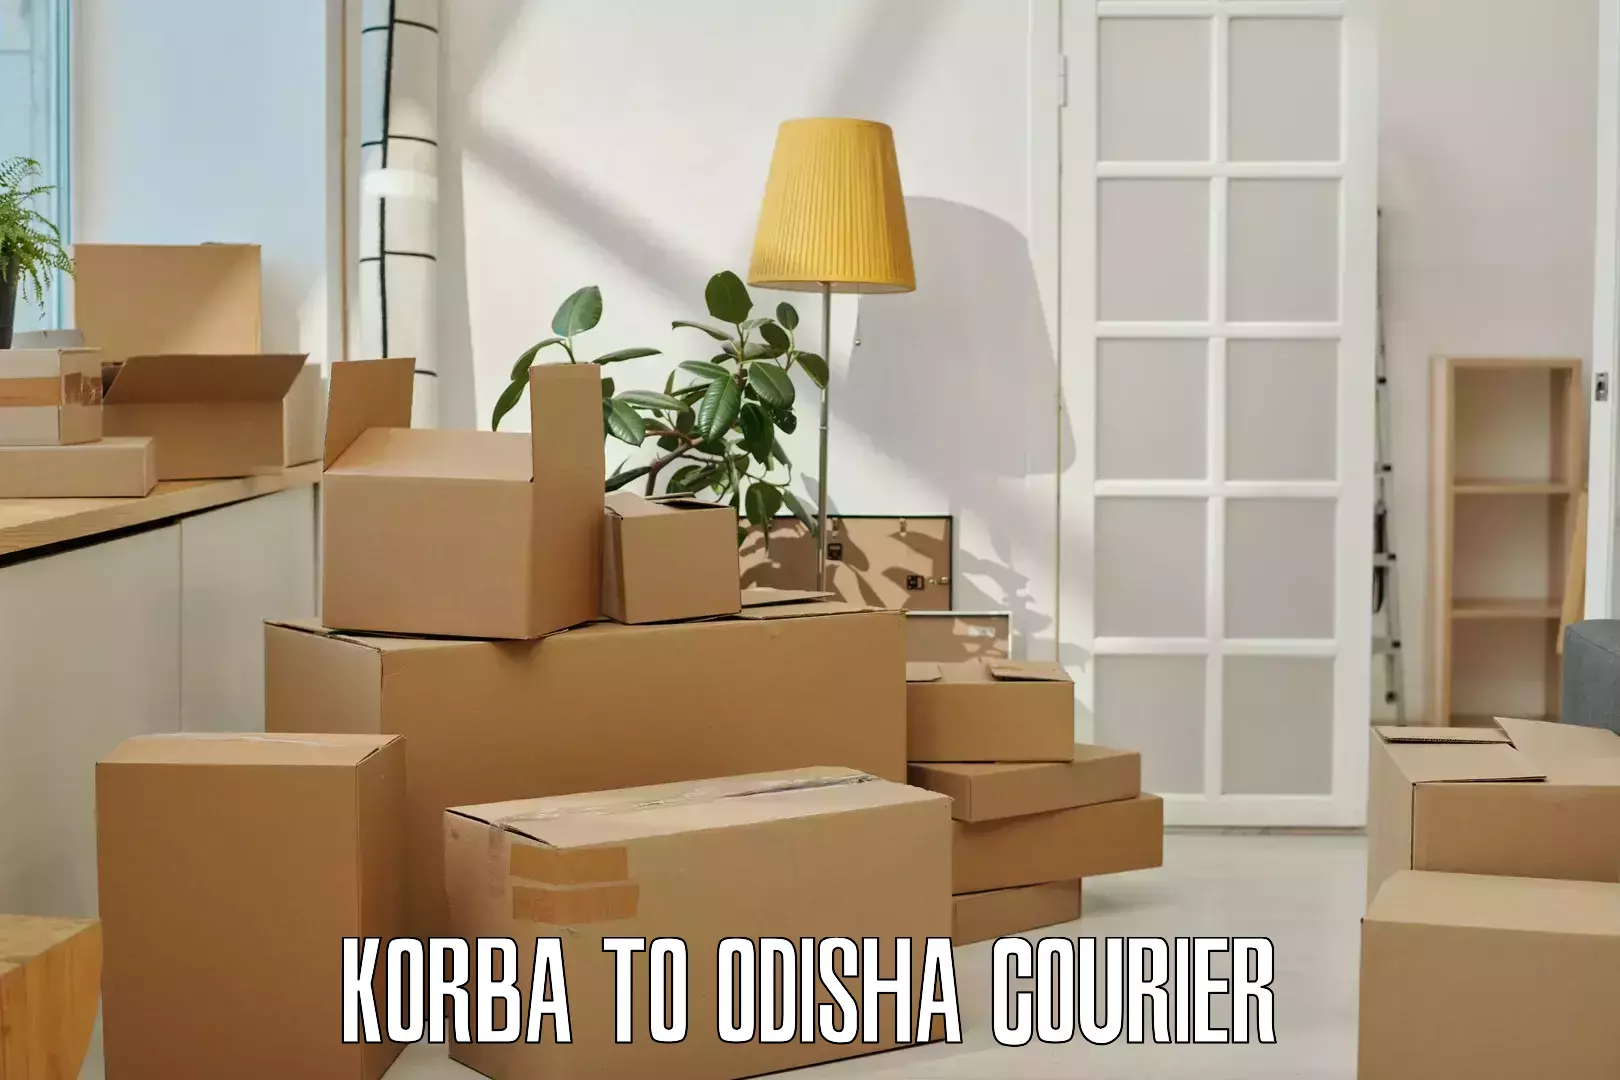 Flexible delivery schedules Korba to Chatrapur